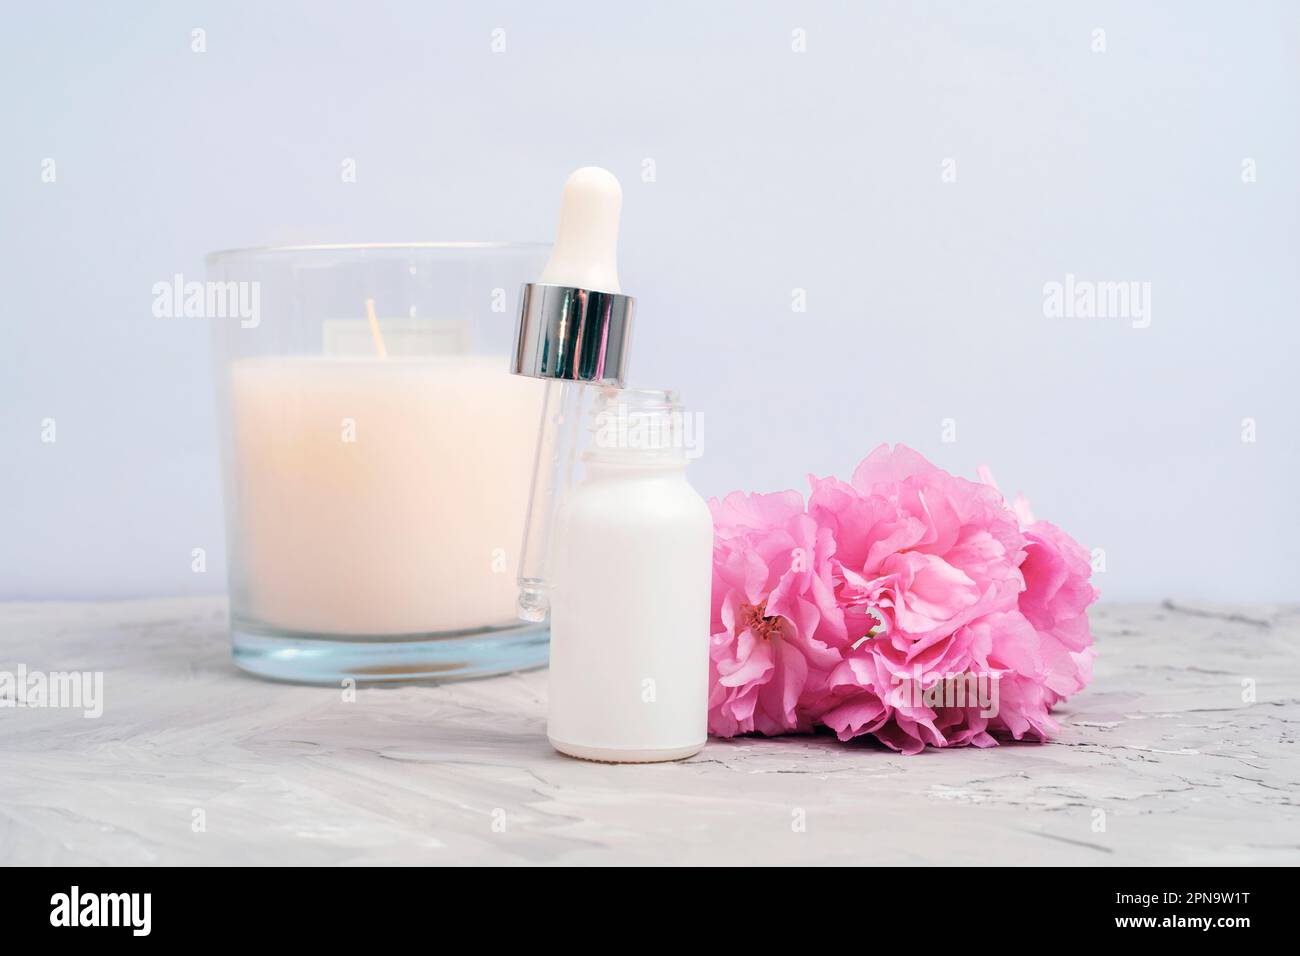 White serum dropper bottle, pink cherry blossom and aroma candle on concrete background. Closeup, front view. Stock Photo